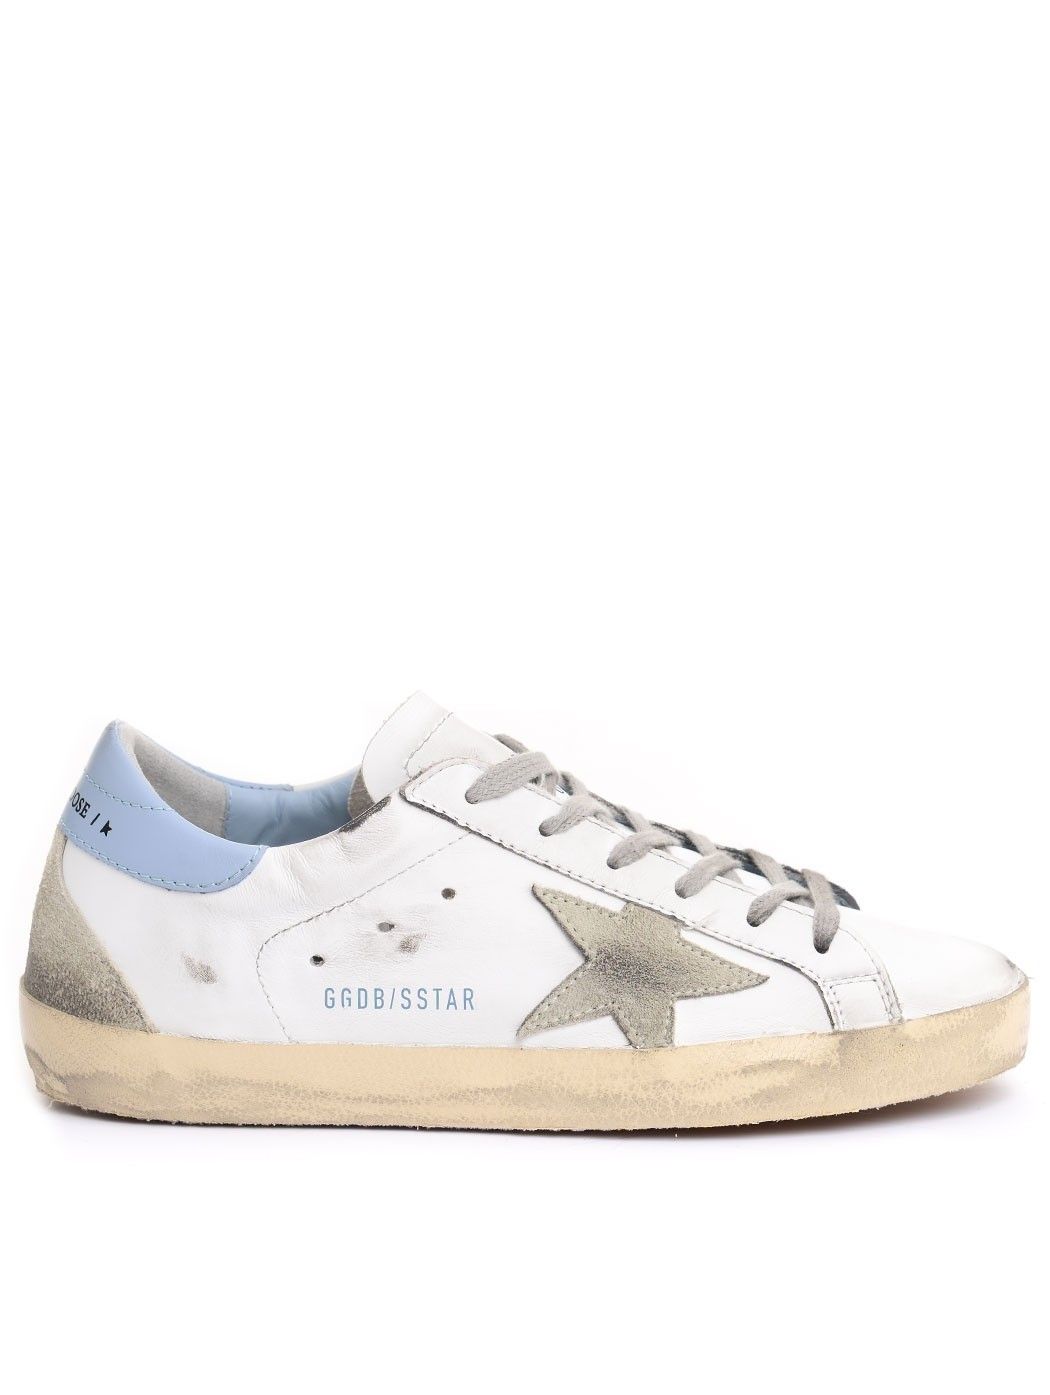  WOMAN SHOES,GIVENCHY SHOES,GOLDEN GOOSE SHOES,MARNI SHOES  GOLDEN GOOSE GWF00102